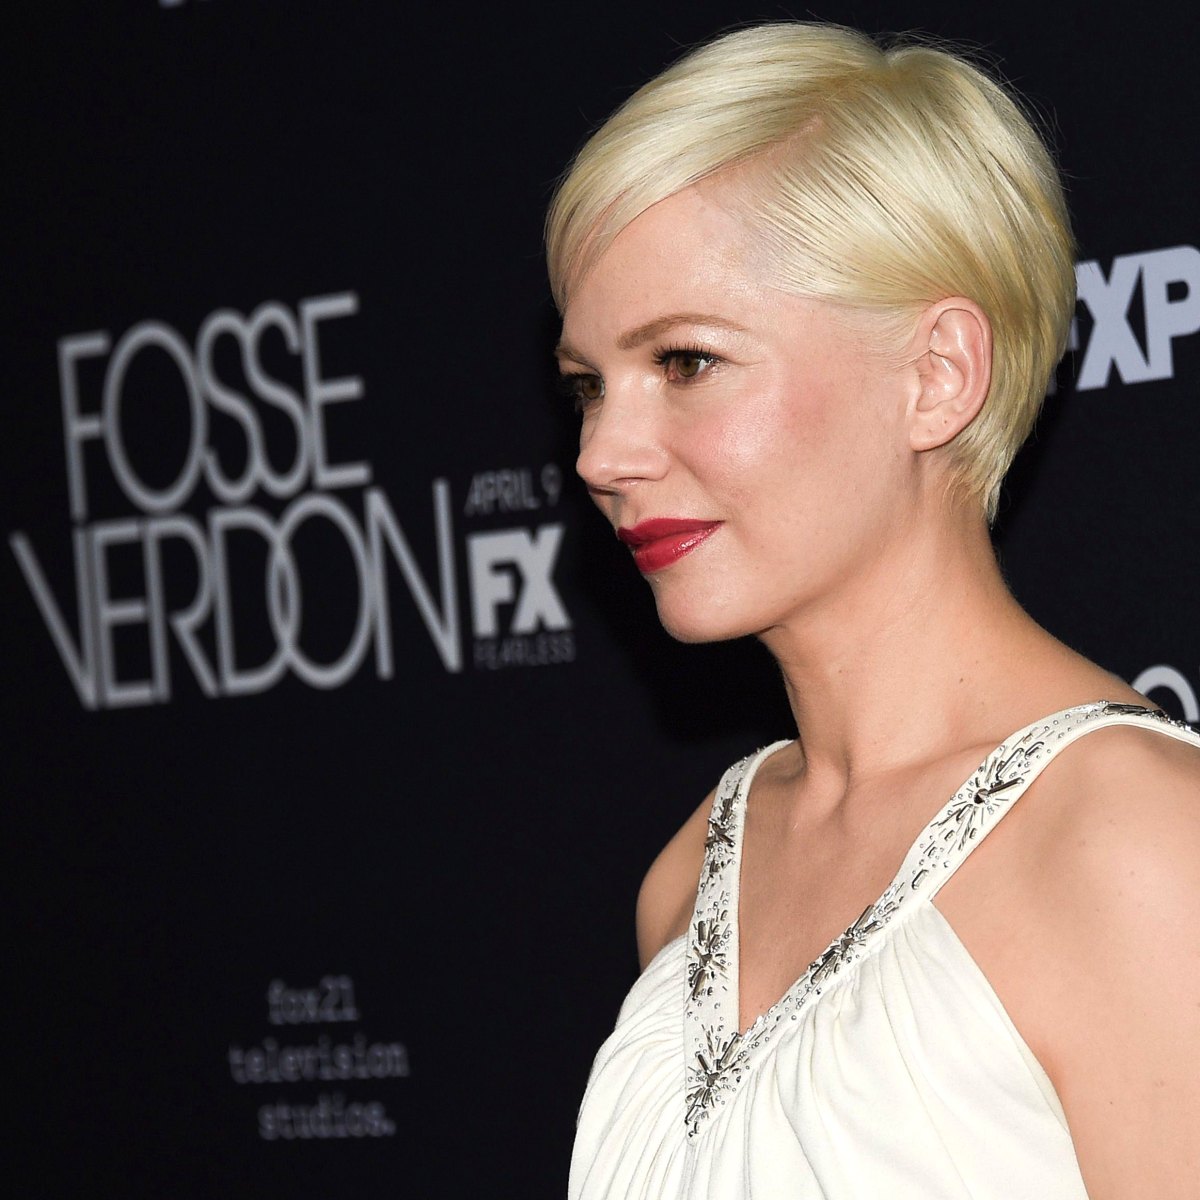 21 of Michelle Williams' Best Hair Moments: From Long Hair to Short Hair